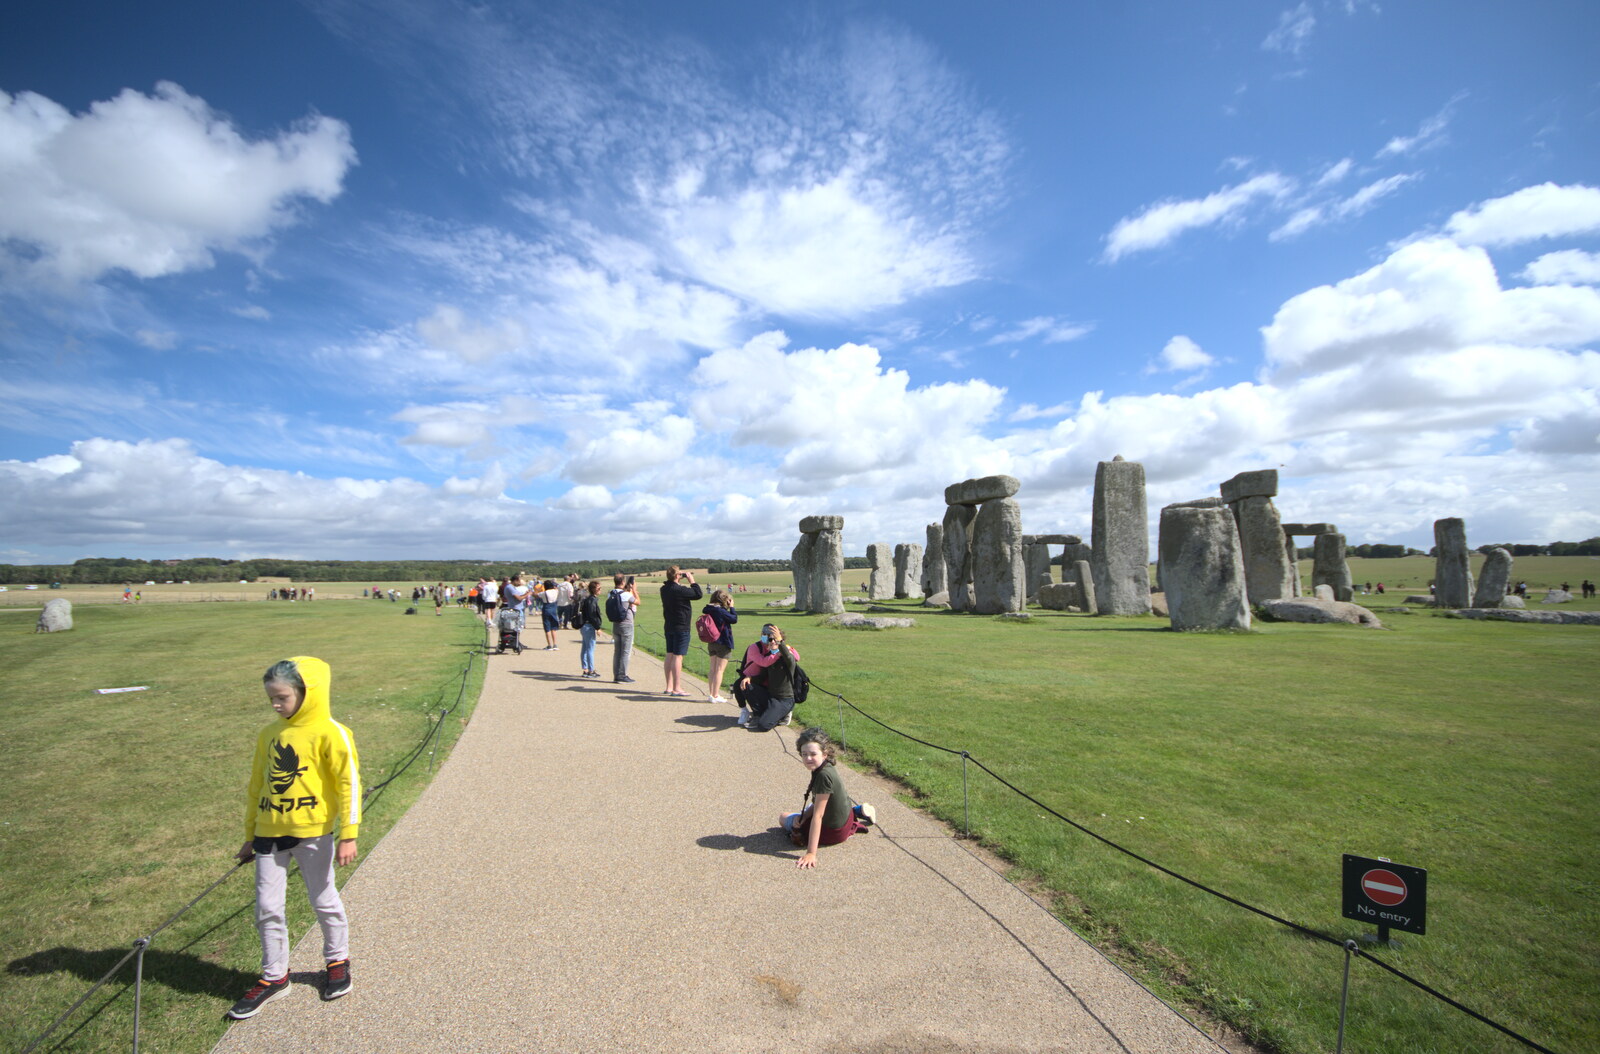 Harry and Fred on the path from Stone Circles: Stonehenge and Avebury, Wiltshire - 22nd August 2020